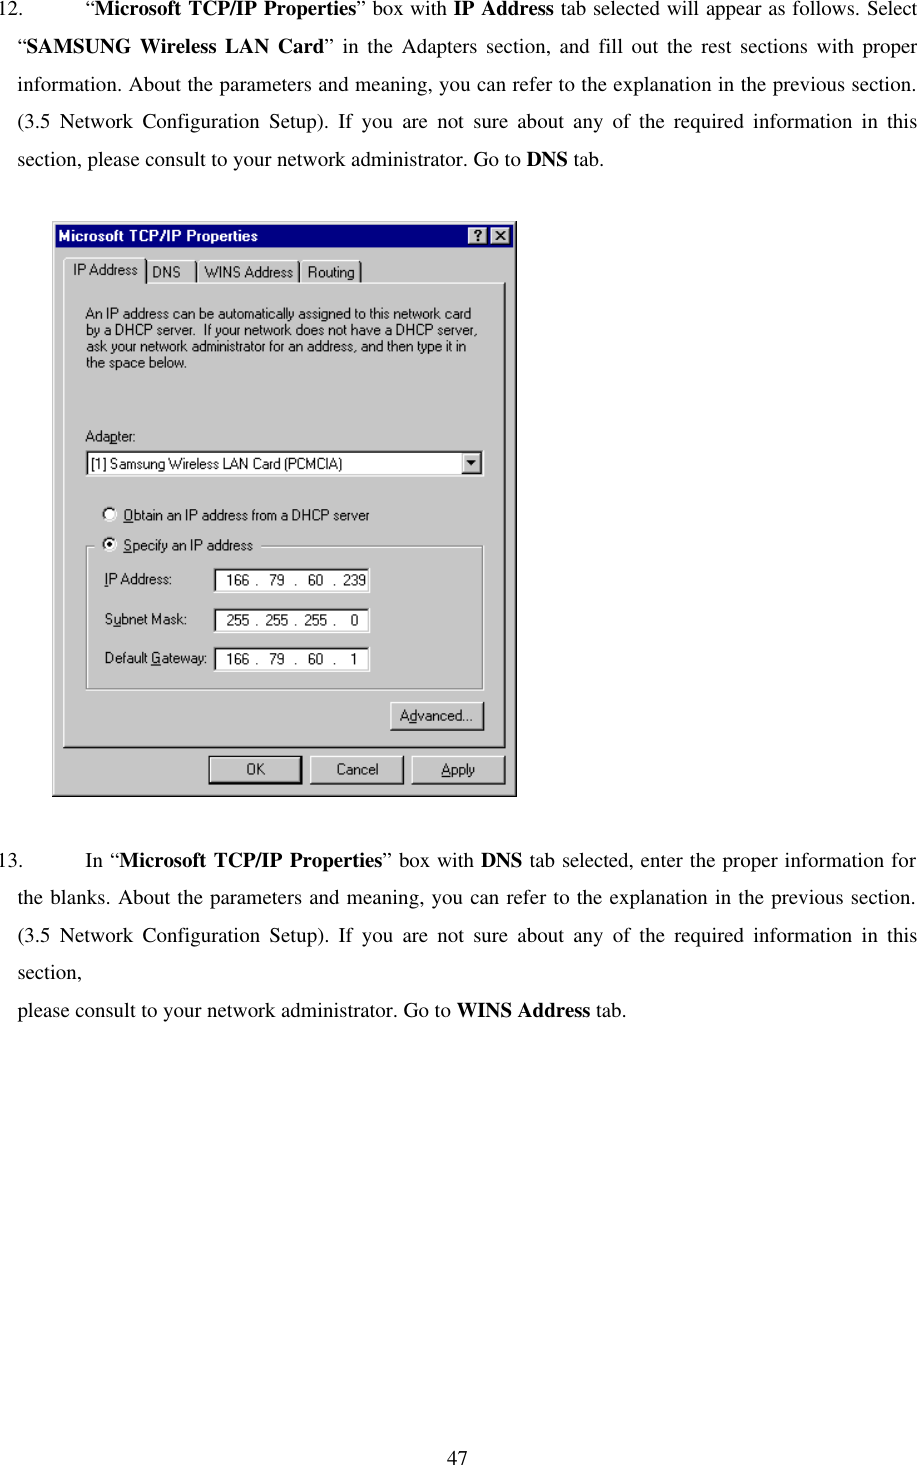  47 12. “Microsoft TCP/IP Properties” box with IP Address tab selected will appear as follows. Select “SAMSUNG Wireless LAN Card” in the Adapters section, and fill out the rest sections with proper information. About the parameters and meaning, you can refer to the explanation in the previous section. (3.5 Network Configuration Setup). If you are not sure about any of the required information in this section, please consult to your network administrator. Go to DNS tab.               13. In “Microsoft TCP/IP Properties” box with DNS tab selected, enter the proper information for the blanks. About the parameters and meaning, you can refer to the explanation in the previous section. (3.5 Network Configuration Setup). If you are not sure about any of the required information in this section,  please consult to your network administrator. Go to WINS Address tab.   